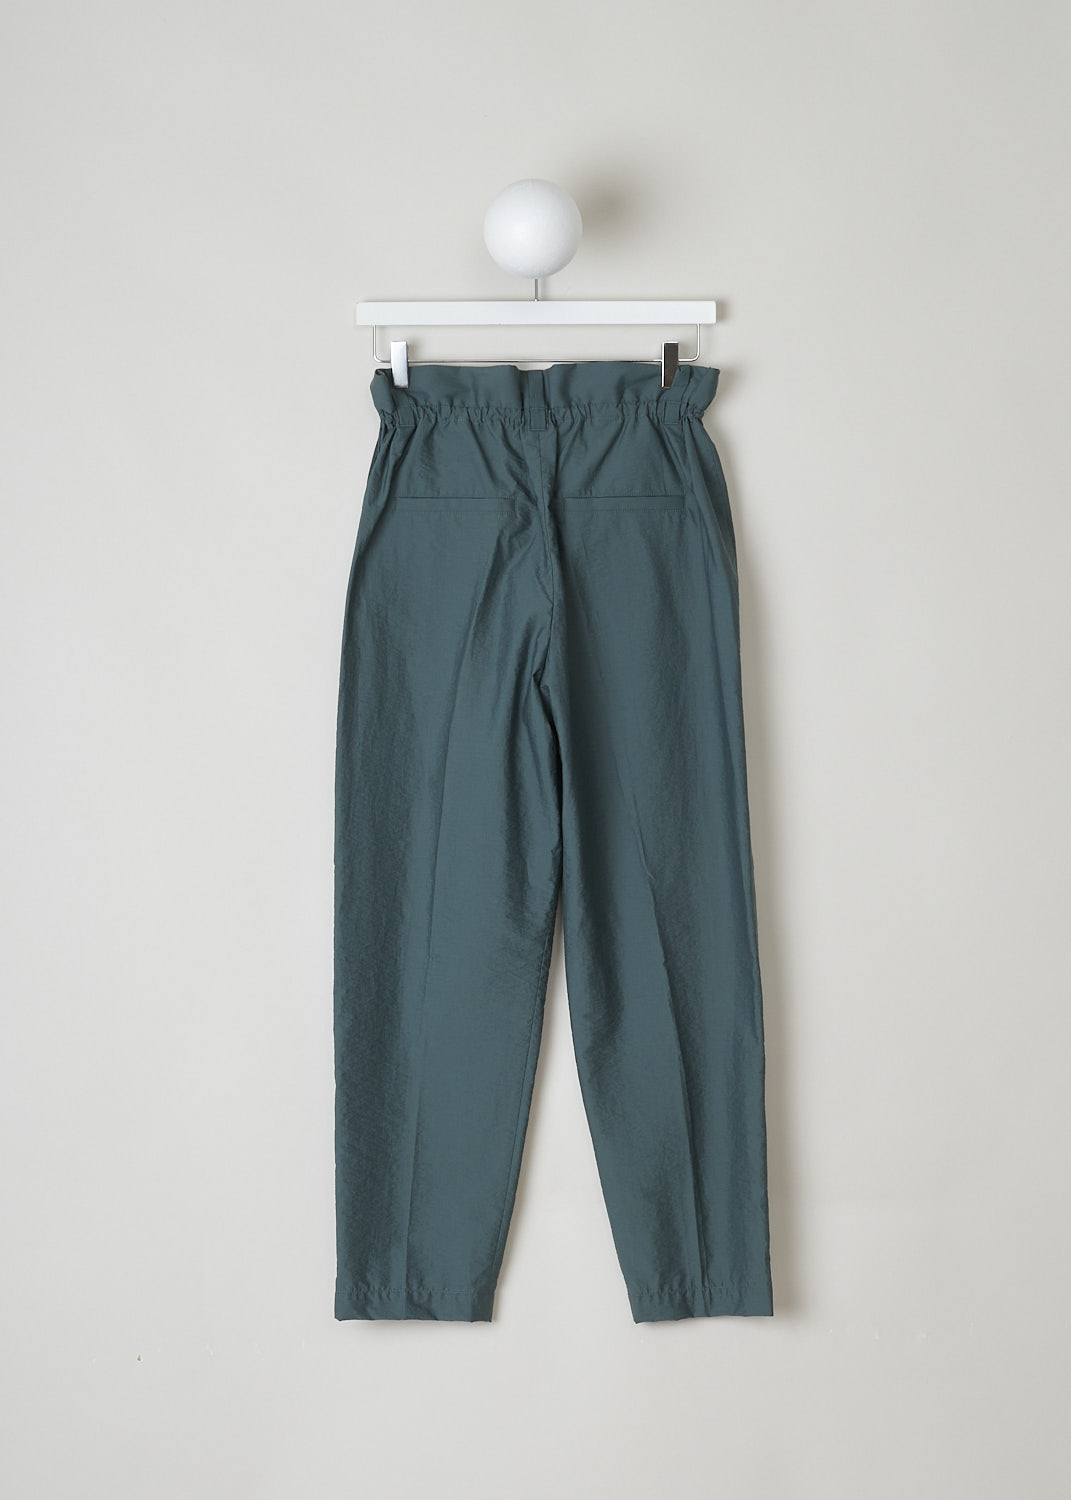 BRUNELLO CUCINELLI, TEAL GREEN PAPER BAG PANTS, M0F79P7102_C7287, Green, Blue, Back, These teal green pants have a paper bag waist with belt loops.  The waistline is partly elasticated. The concealed press studs and zip function as the closure option. These pants have slanted pockets in the front and welt pockets in the back. The tapered pant legs have a centre crease. 
